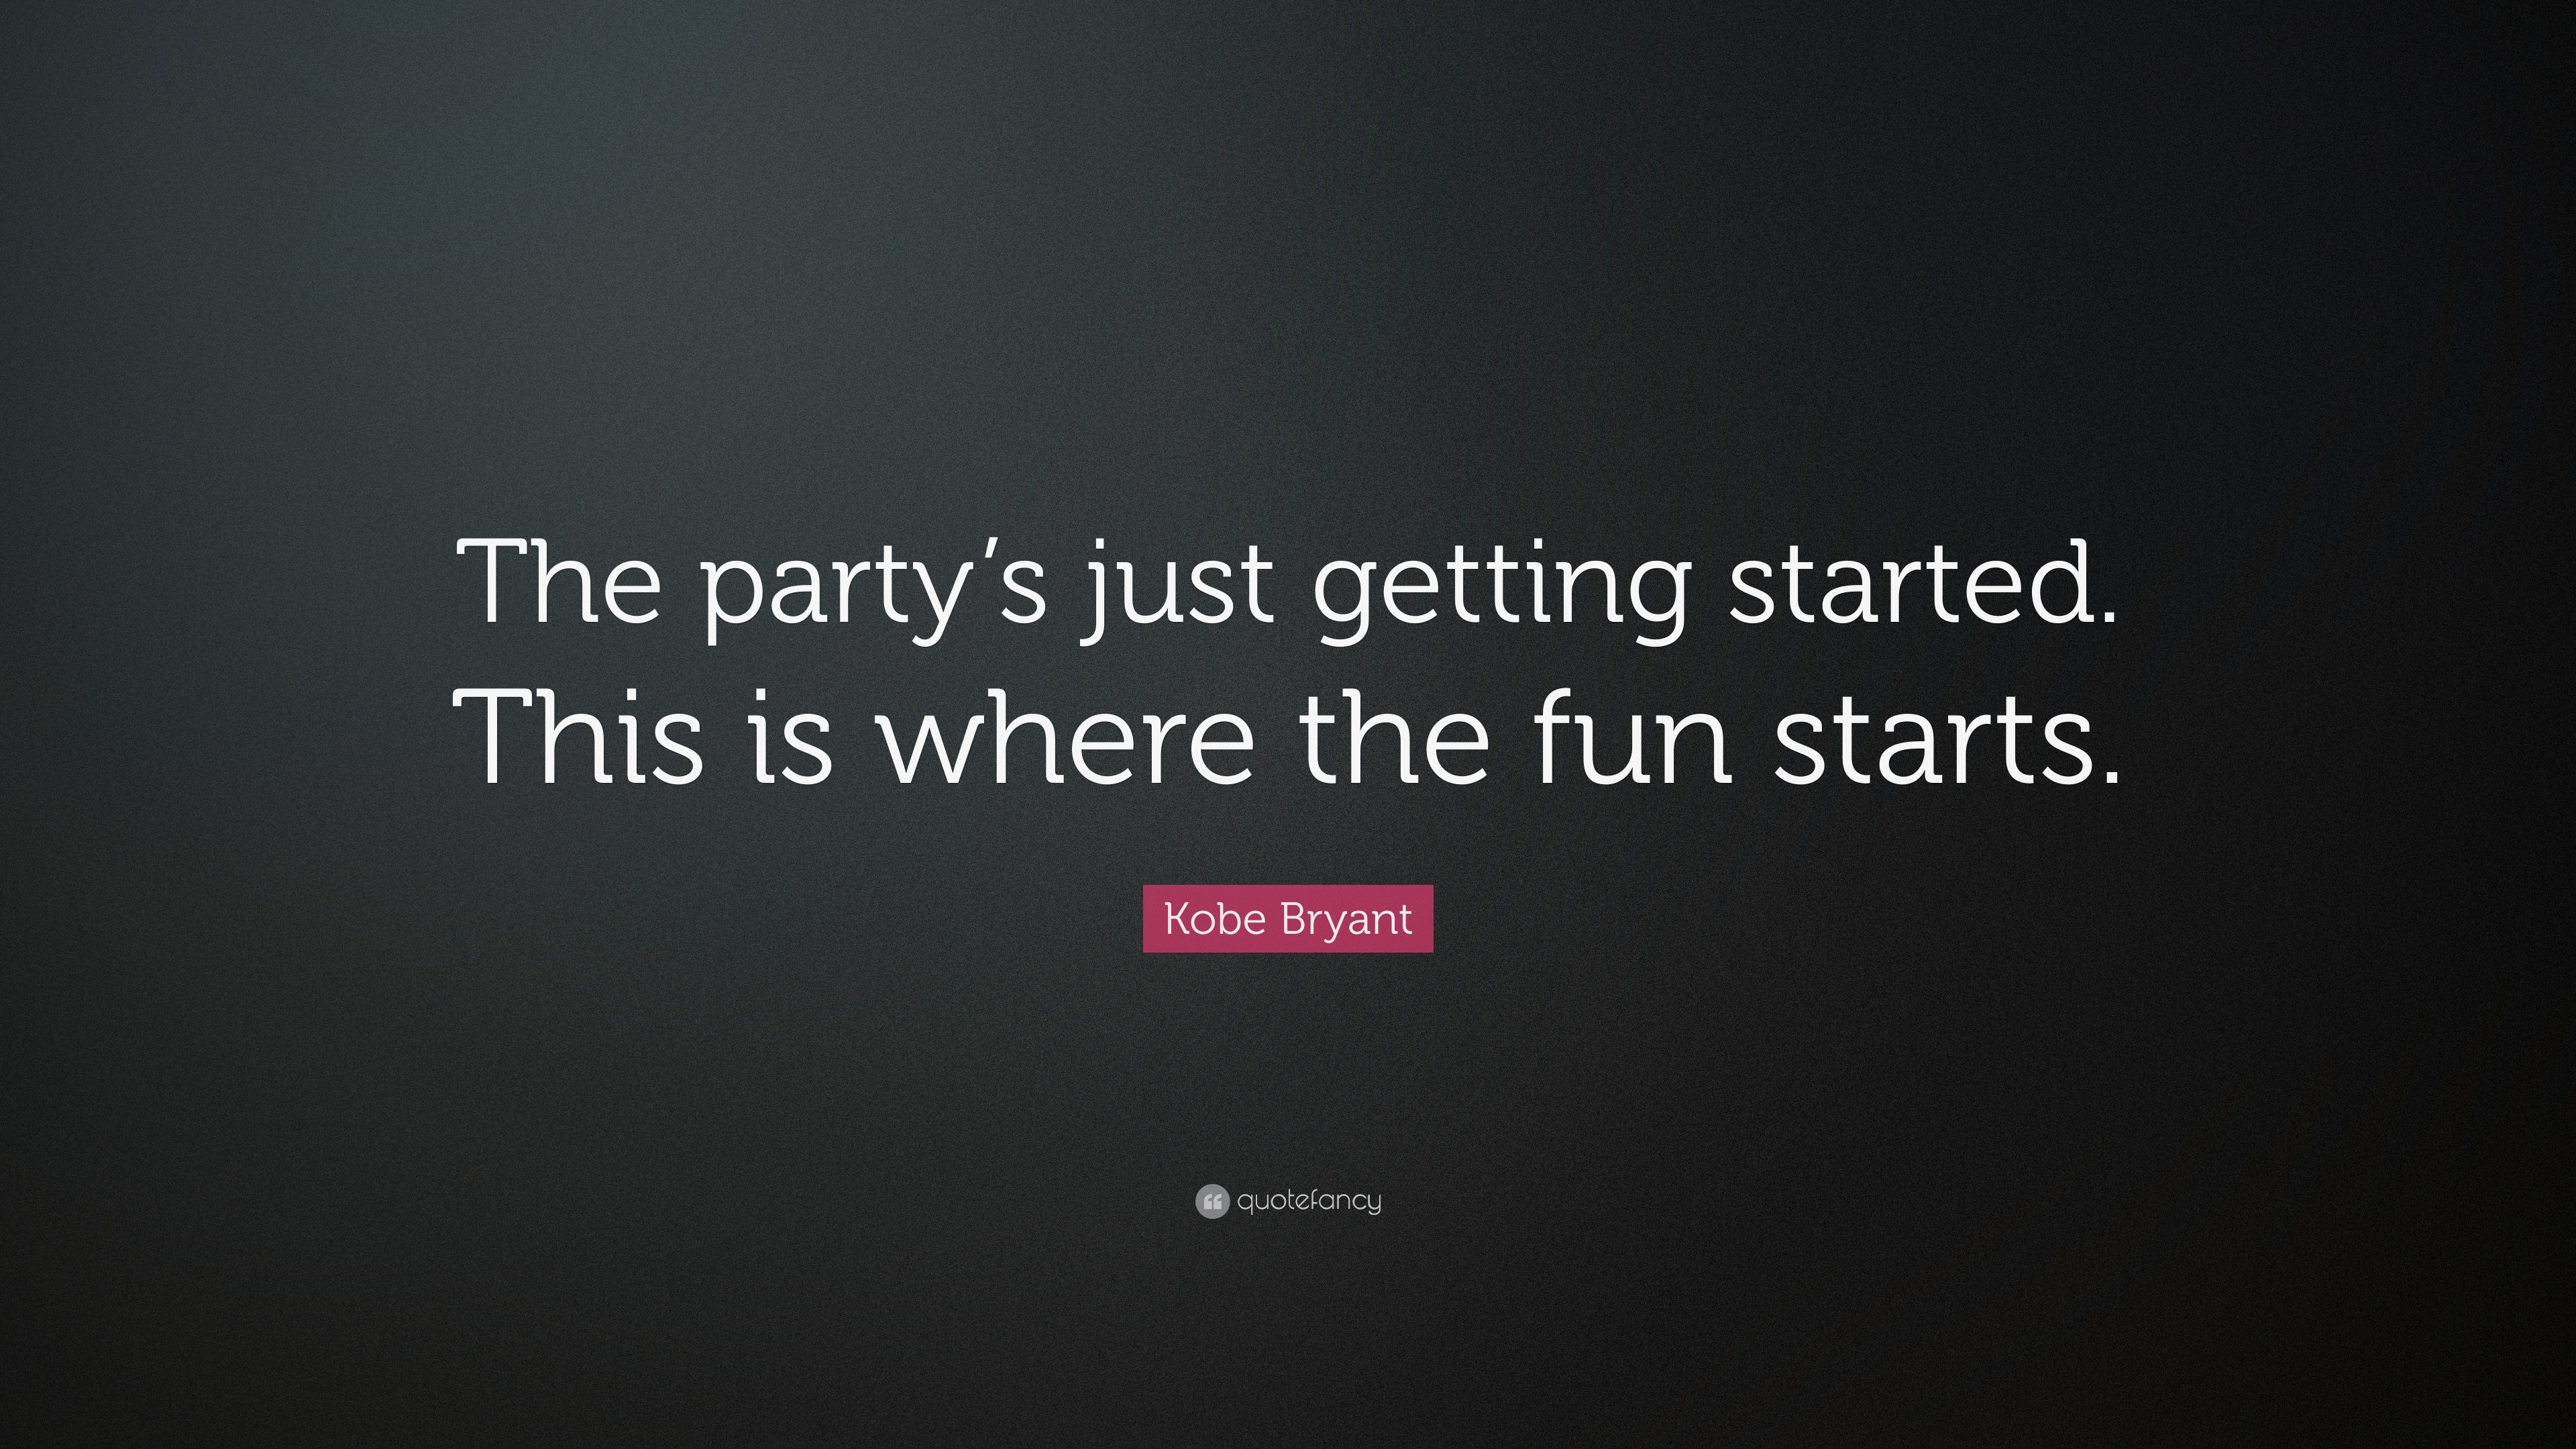 https://quotefancy.com/media/wallpaper/3840x2160/1805412-Kobe-Bryant-Quote-The-party-s-just-getting-started-This-is-where.jpg